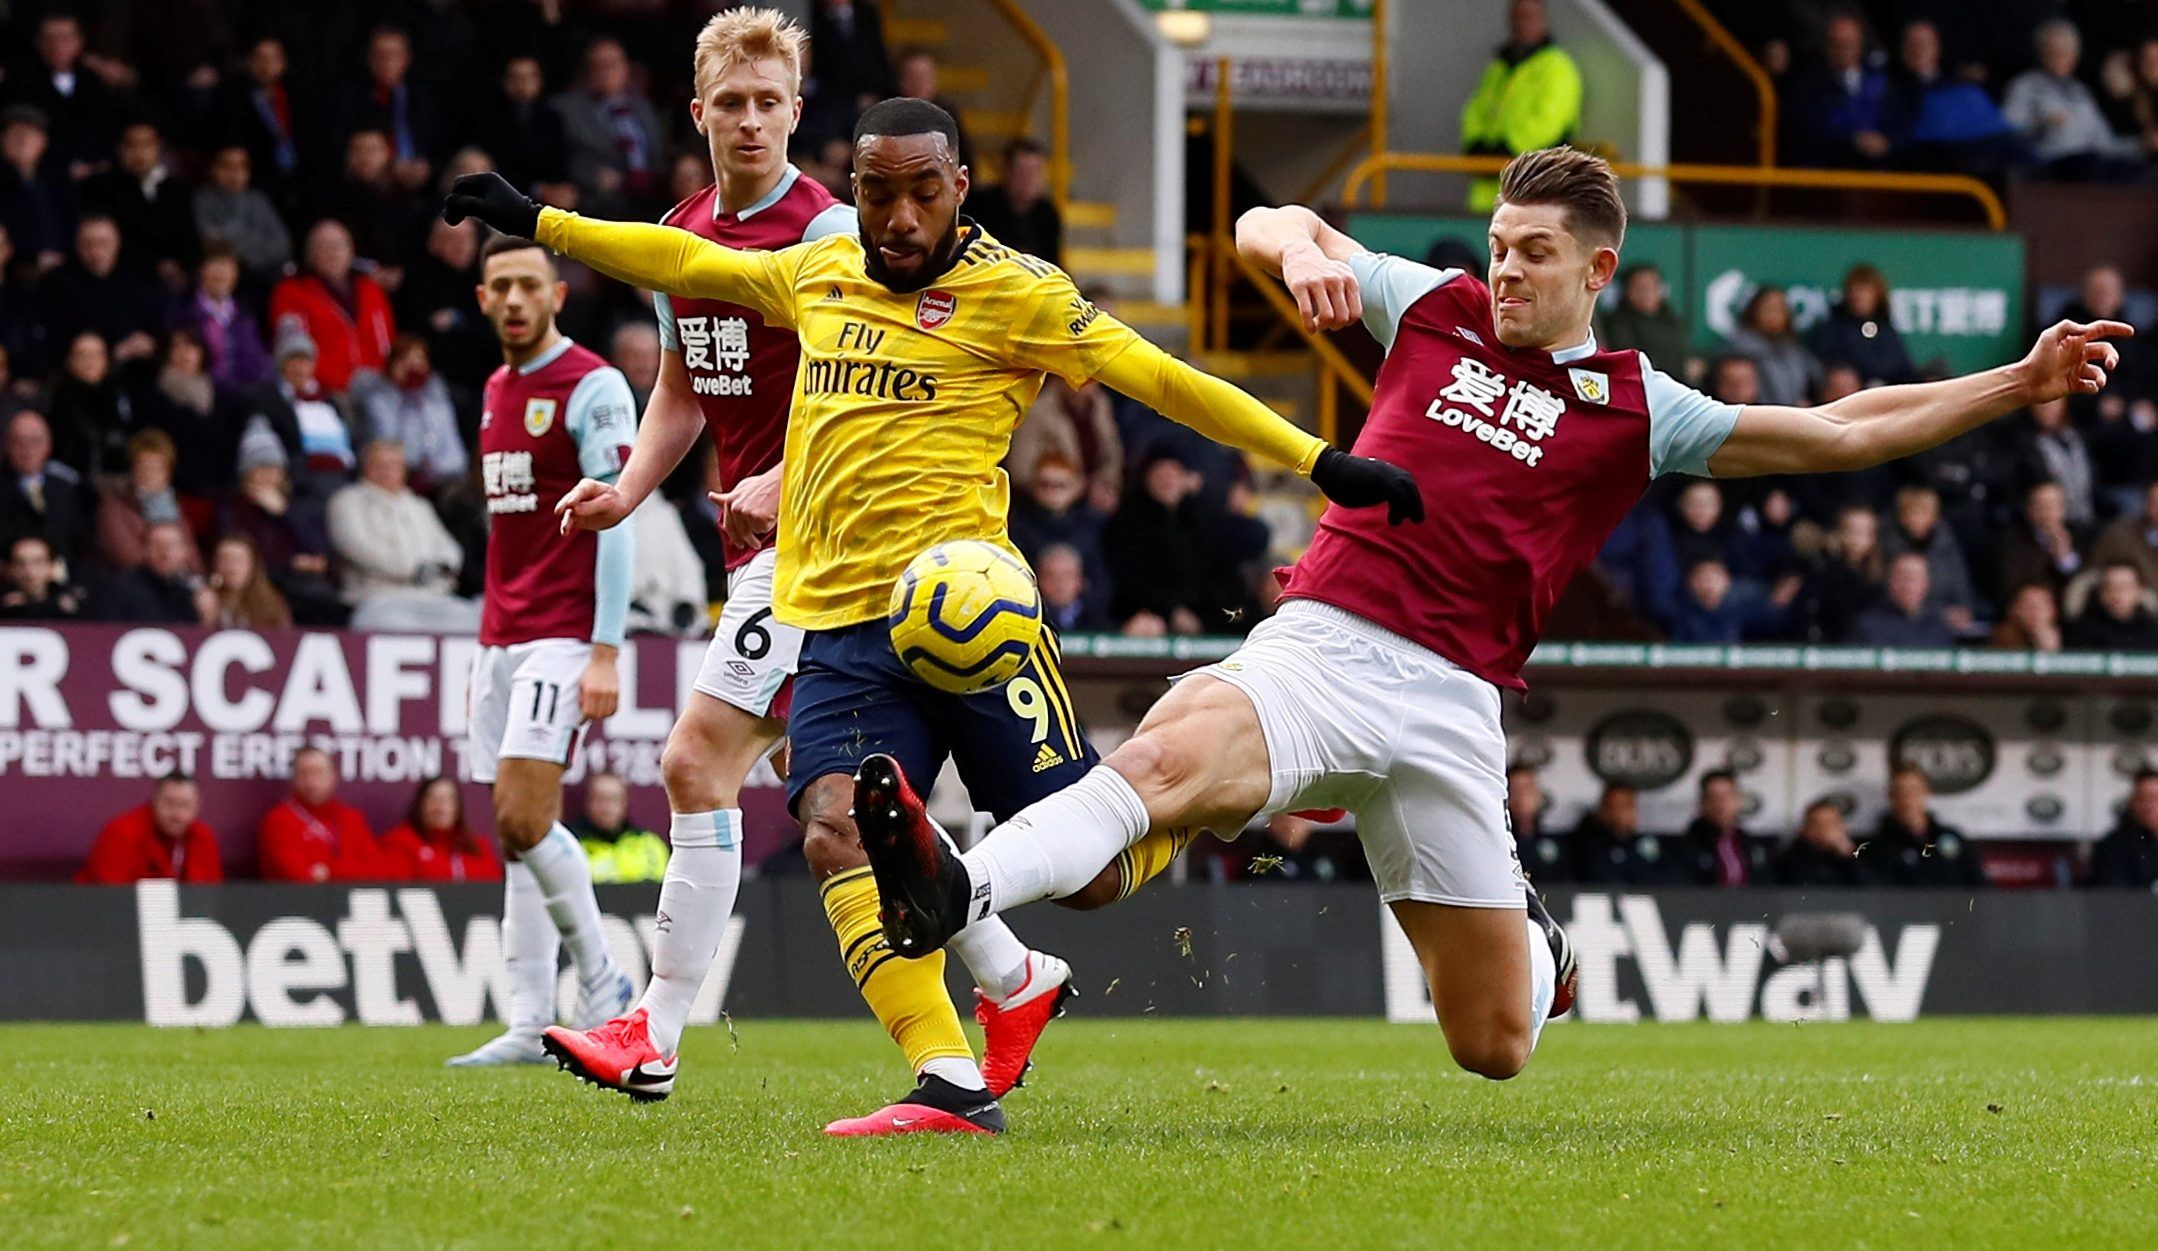 Soccer Football - Premier League - Burnley v Arsenal - Turf Moor, Burnley, Britain - February 2, 2020  Burnley's James Tarkowski in action with Arsenal's Alexandre Lacazette   Action Images via Reuters/Jason Cairnduff  EDITORIAL USE ONLY. No use with unauthorized audio, video, data, fixture lists, club/league logos or 